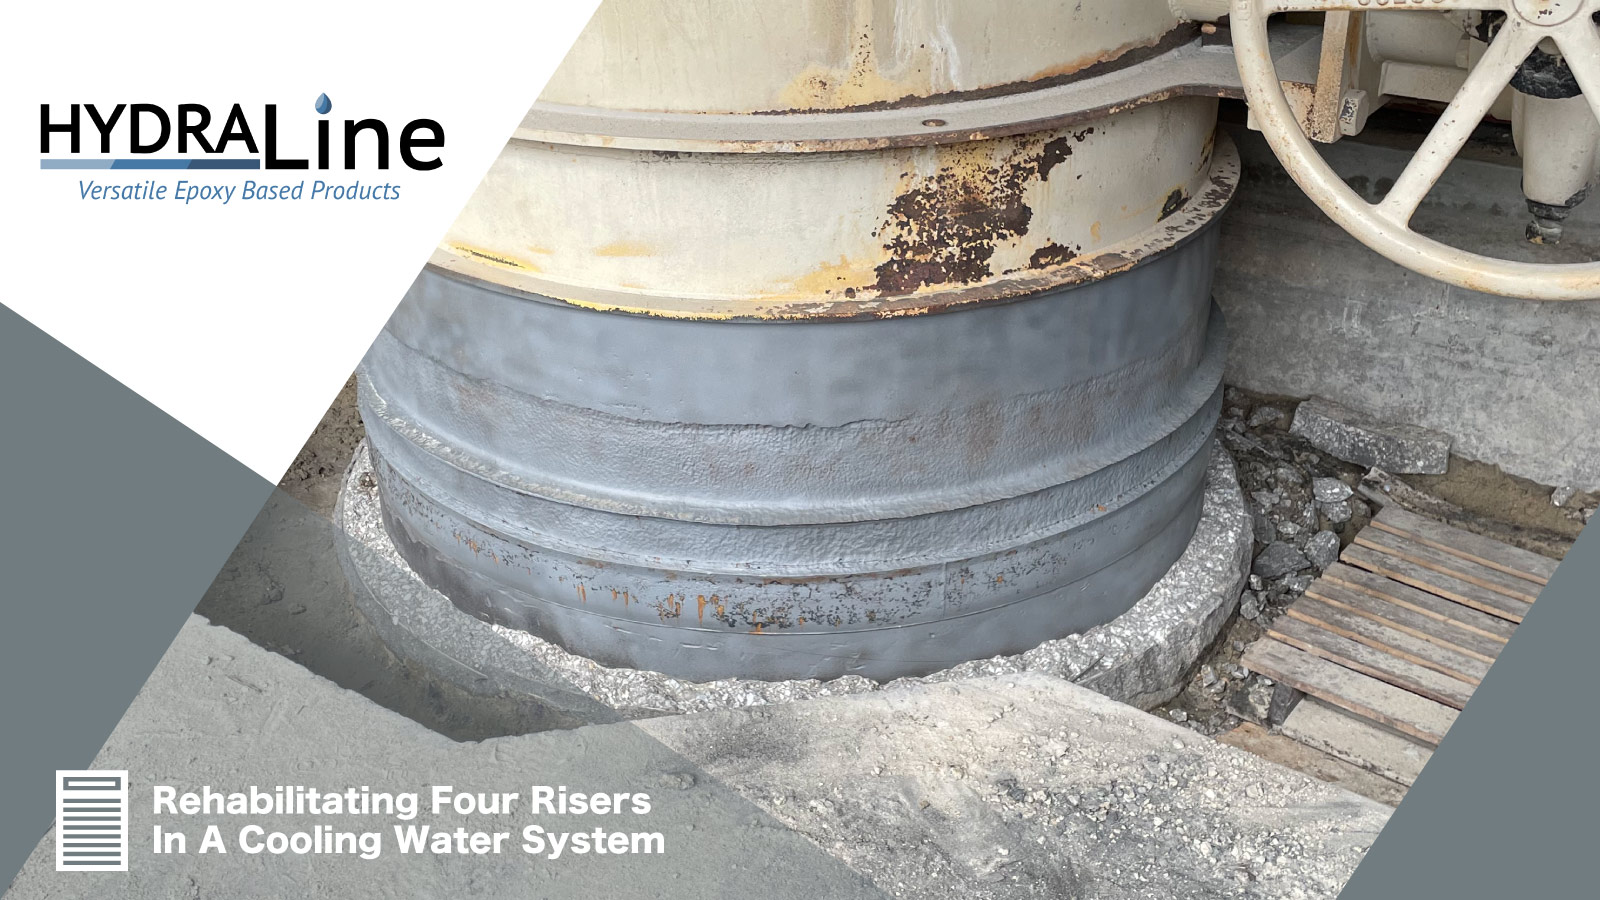 A riser in a cooling water system that has had all the corrosion removed via grit blasting, 'Rehabilitating Four Risers In A Cooling Water System'